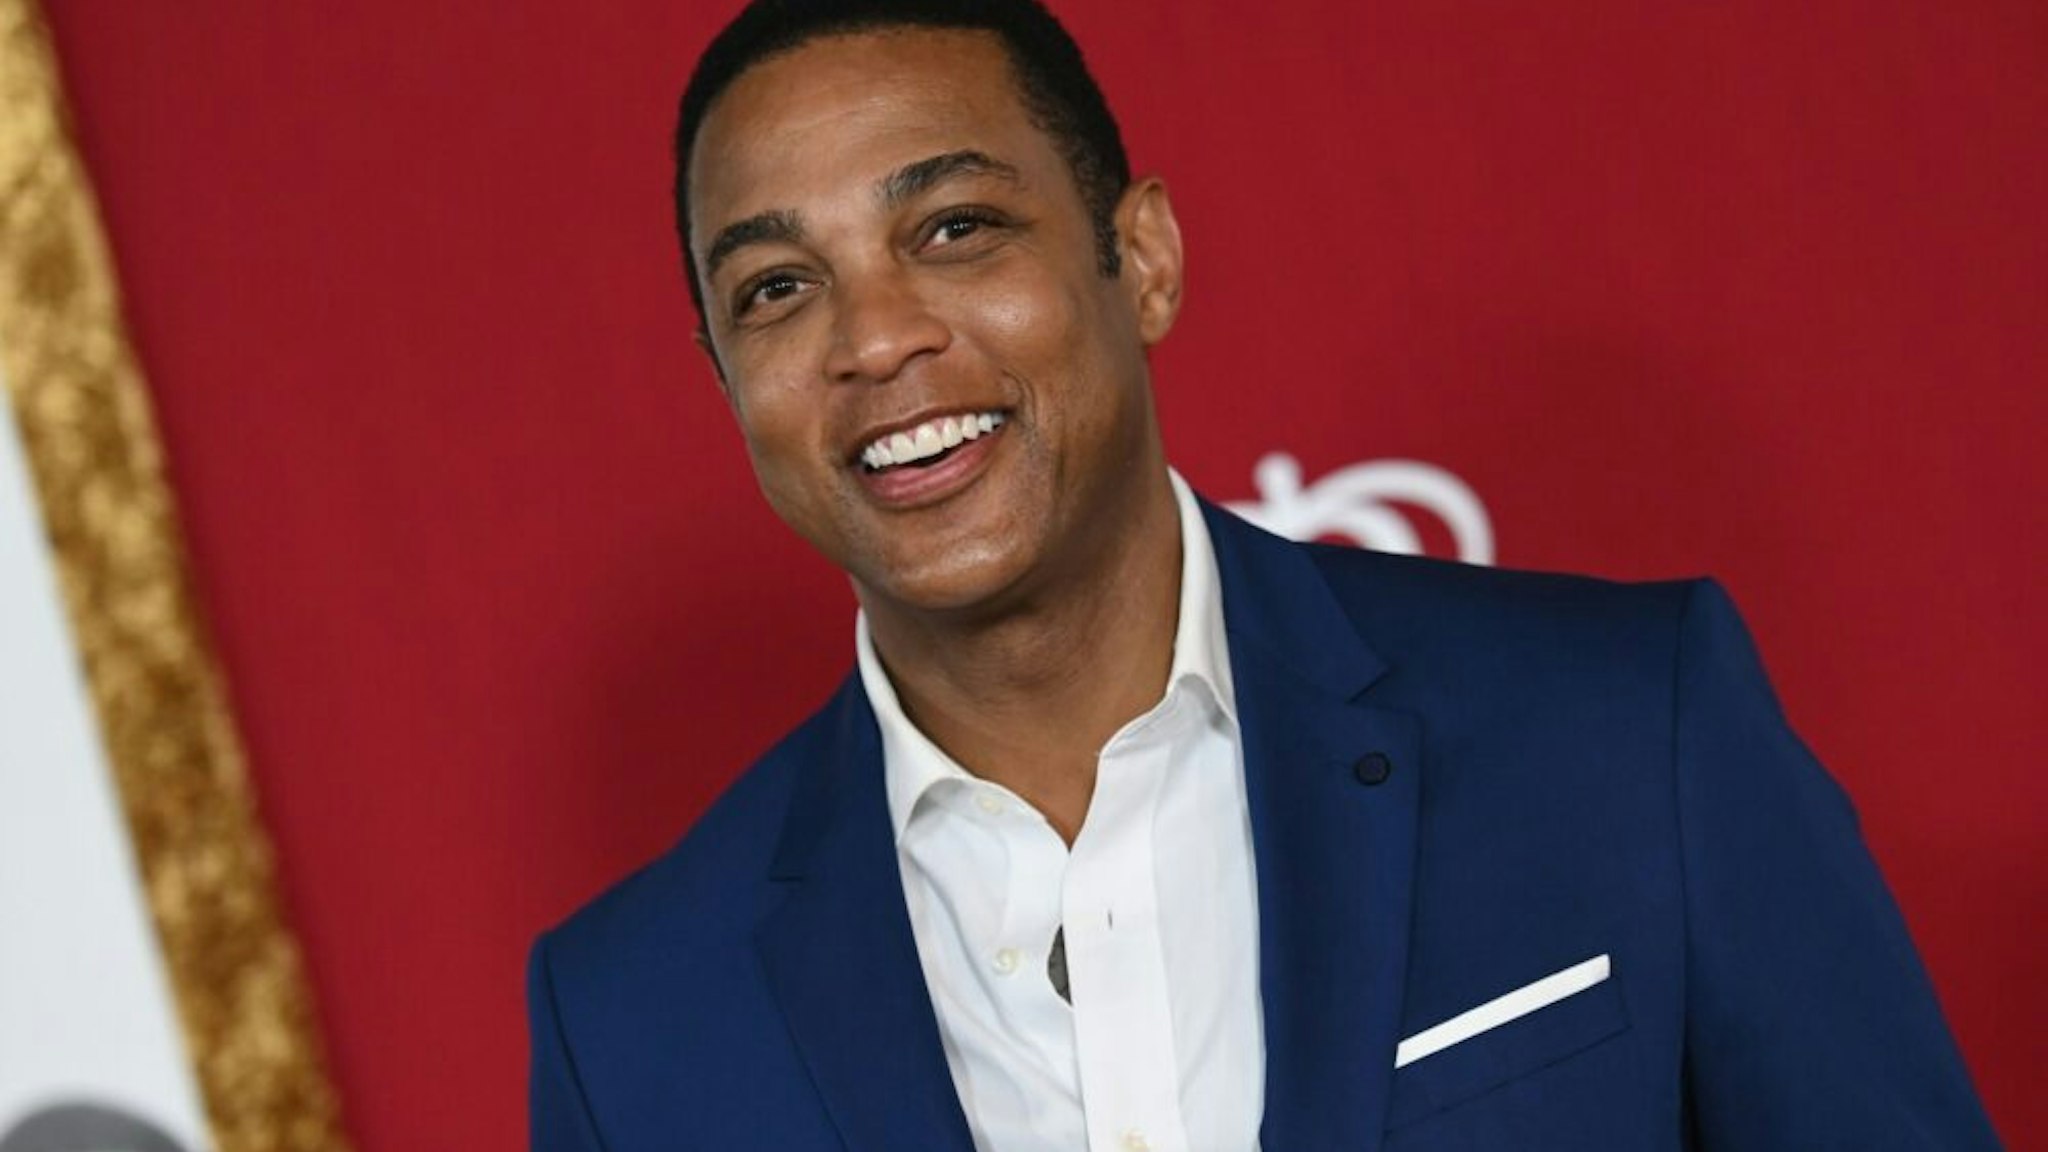 US journalist Don Lemon attends the premiere of "Shaft" at AMC Lincoln Square on June 10, 2019 in New York City.